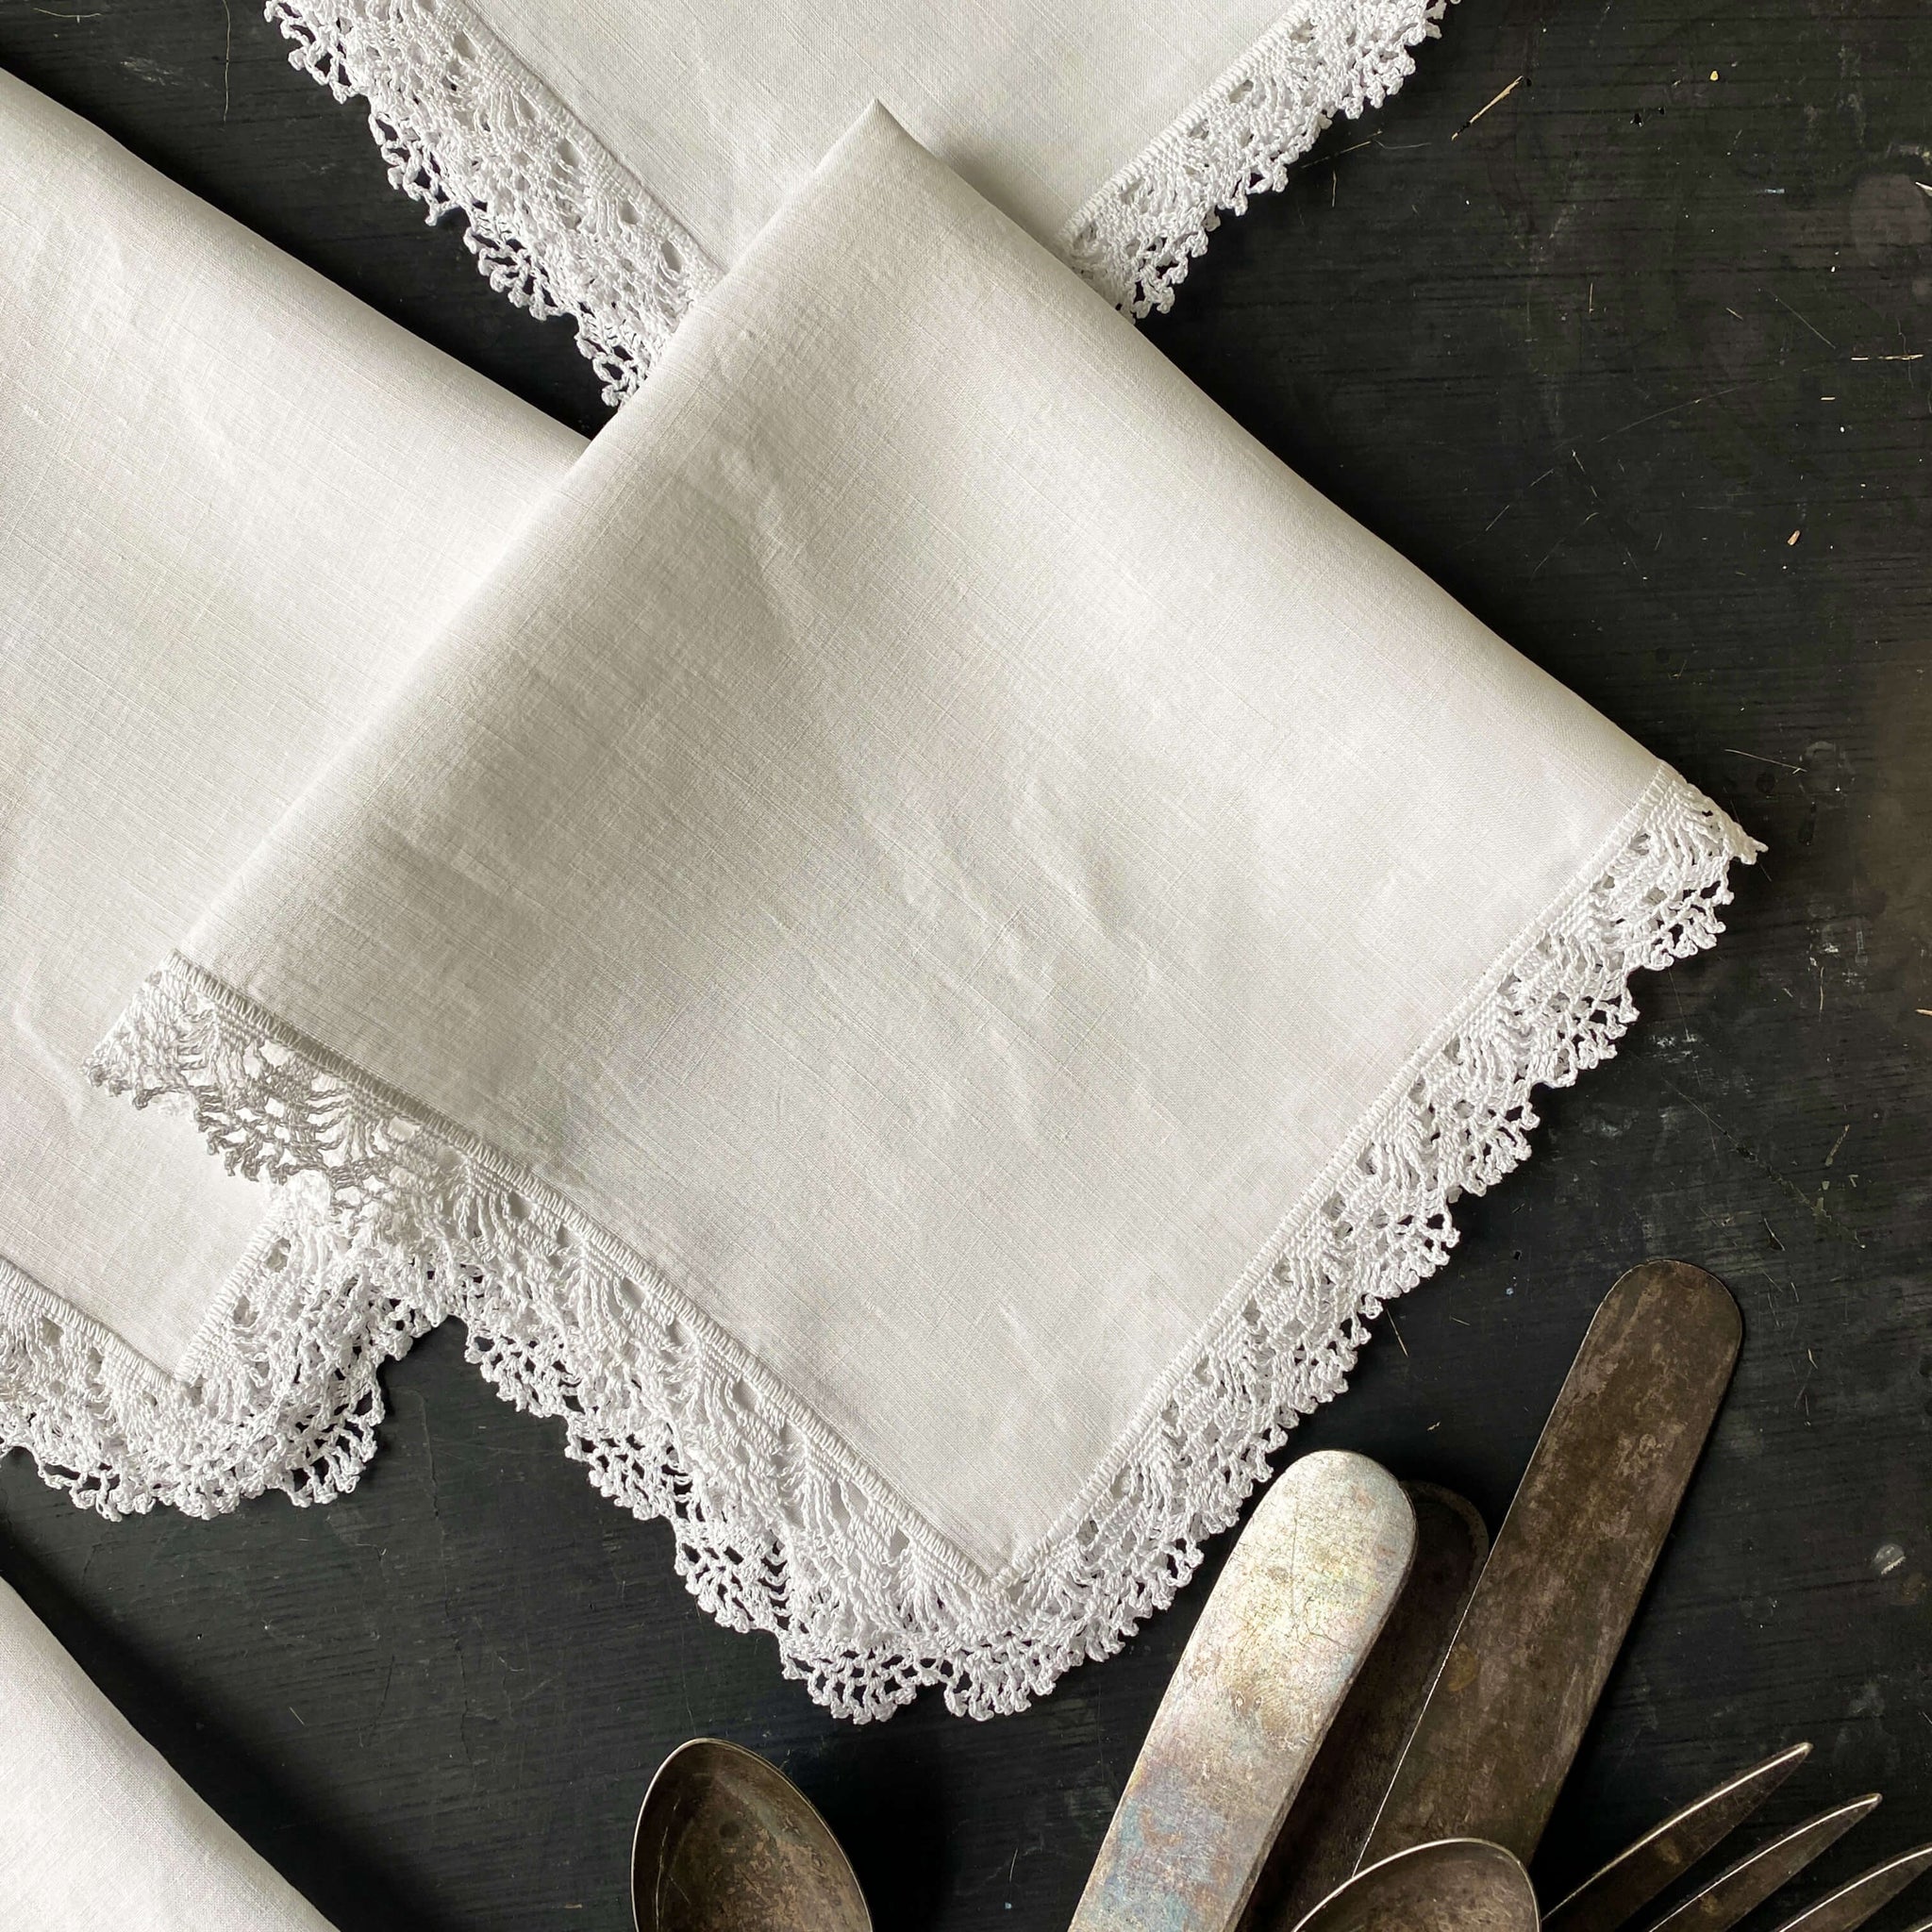 Vintage White Linen Napkins with Crocheted Lace Edge - Set of 8 - 13x13 Hors D'oeuvres Size